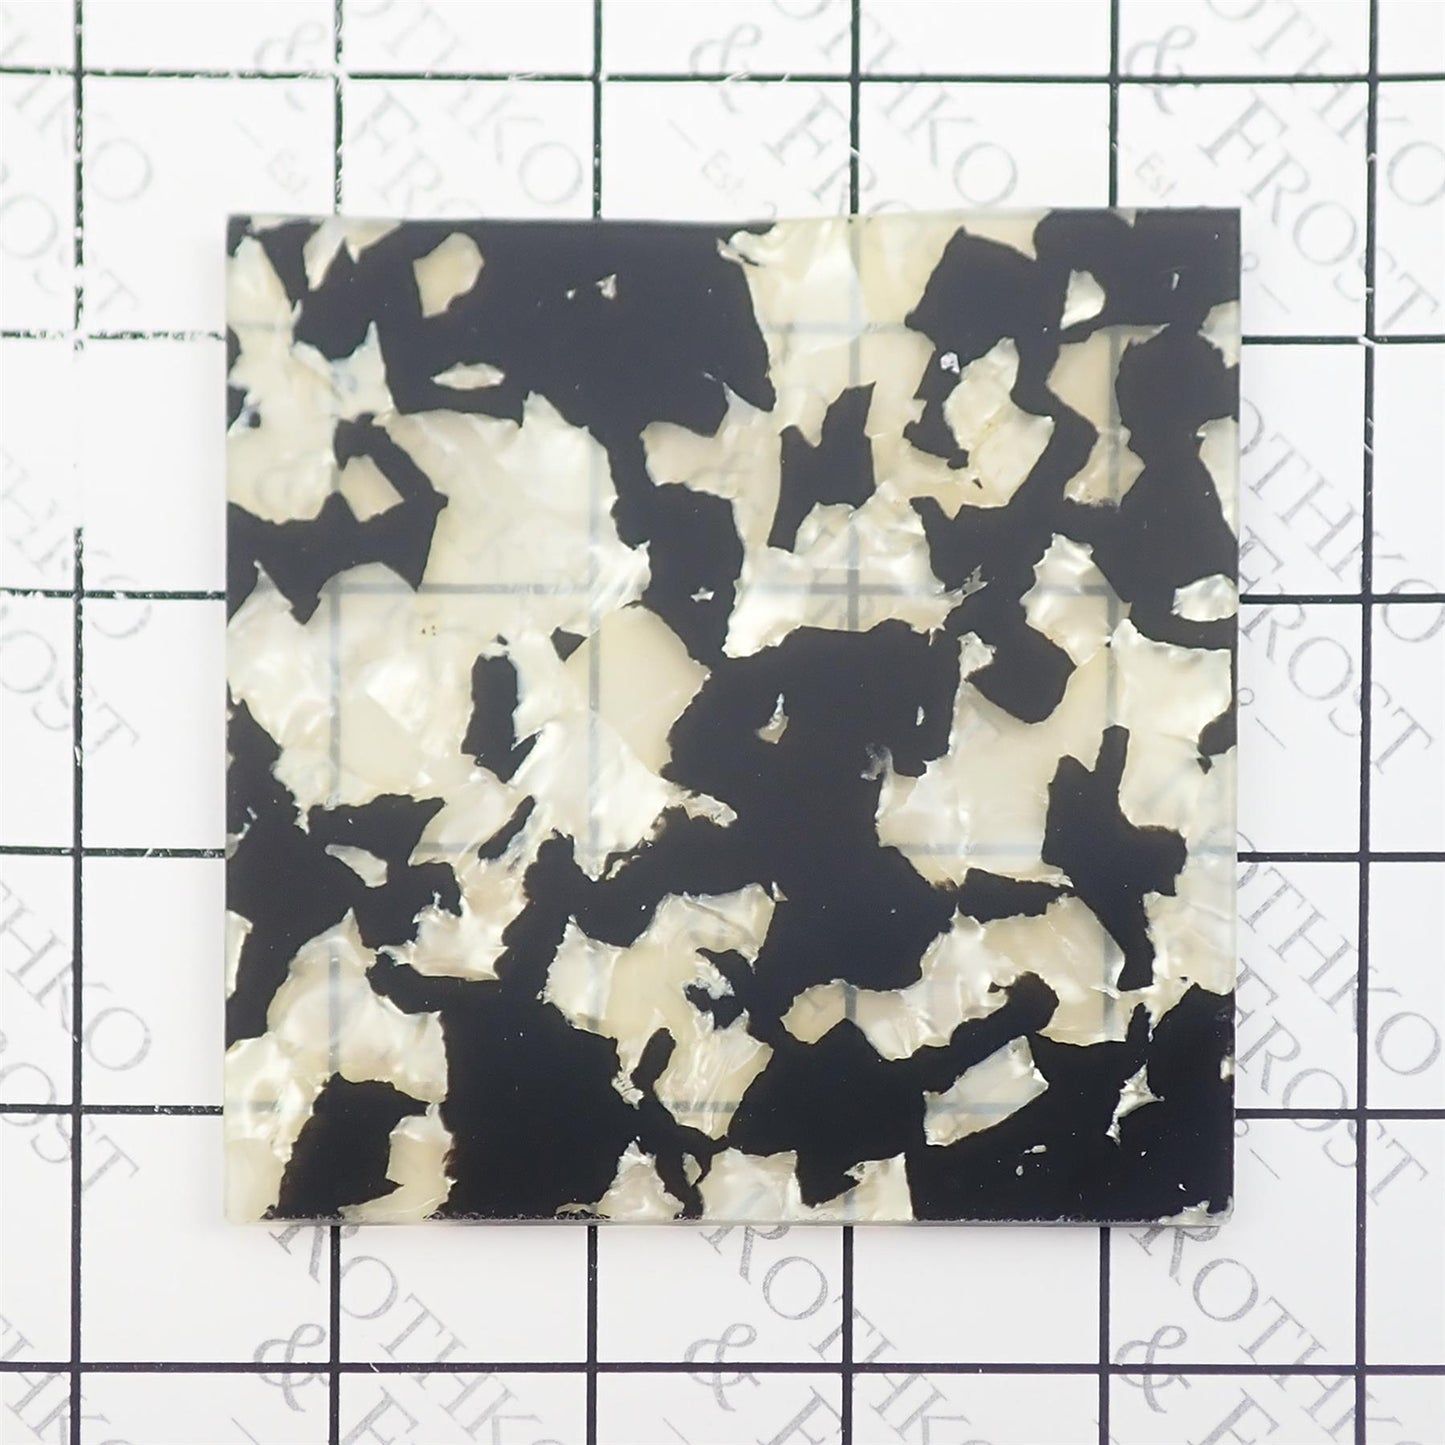 Incudo Black and White Pearloid Celluloid Laminate Acrylic Sheet - 150x125x3mm